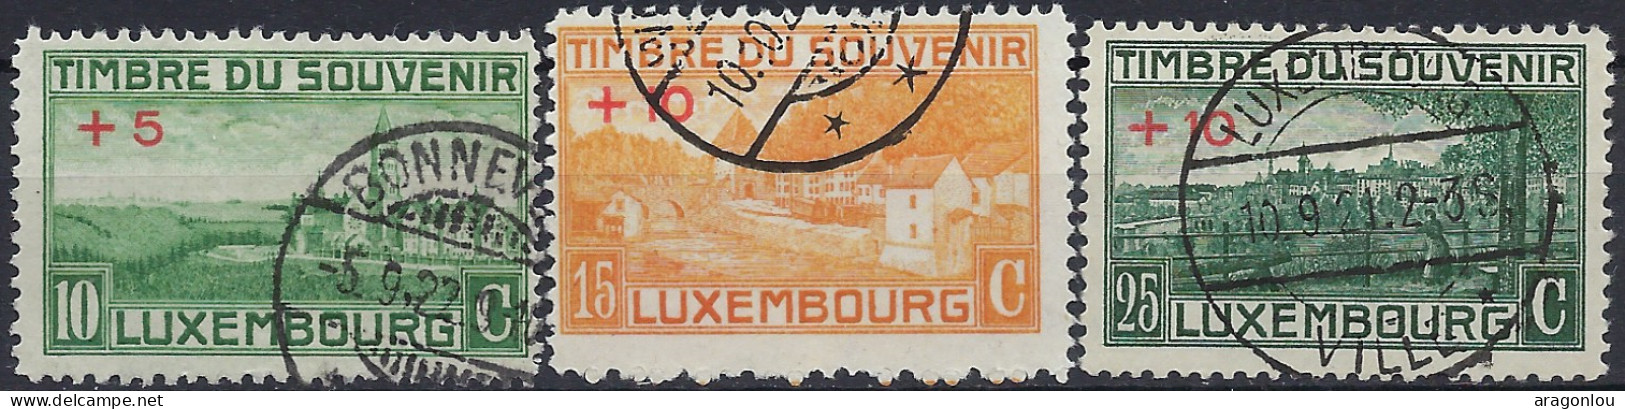 Luxembourg - Luxemburg - Timbres - 1921   1ière  Guerre Mondiale   Série   °   VC. 20,- - Usados